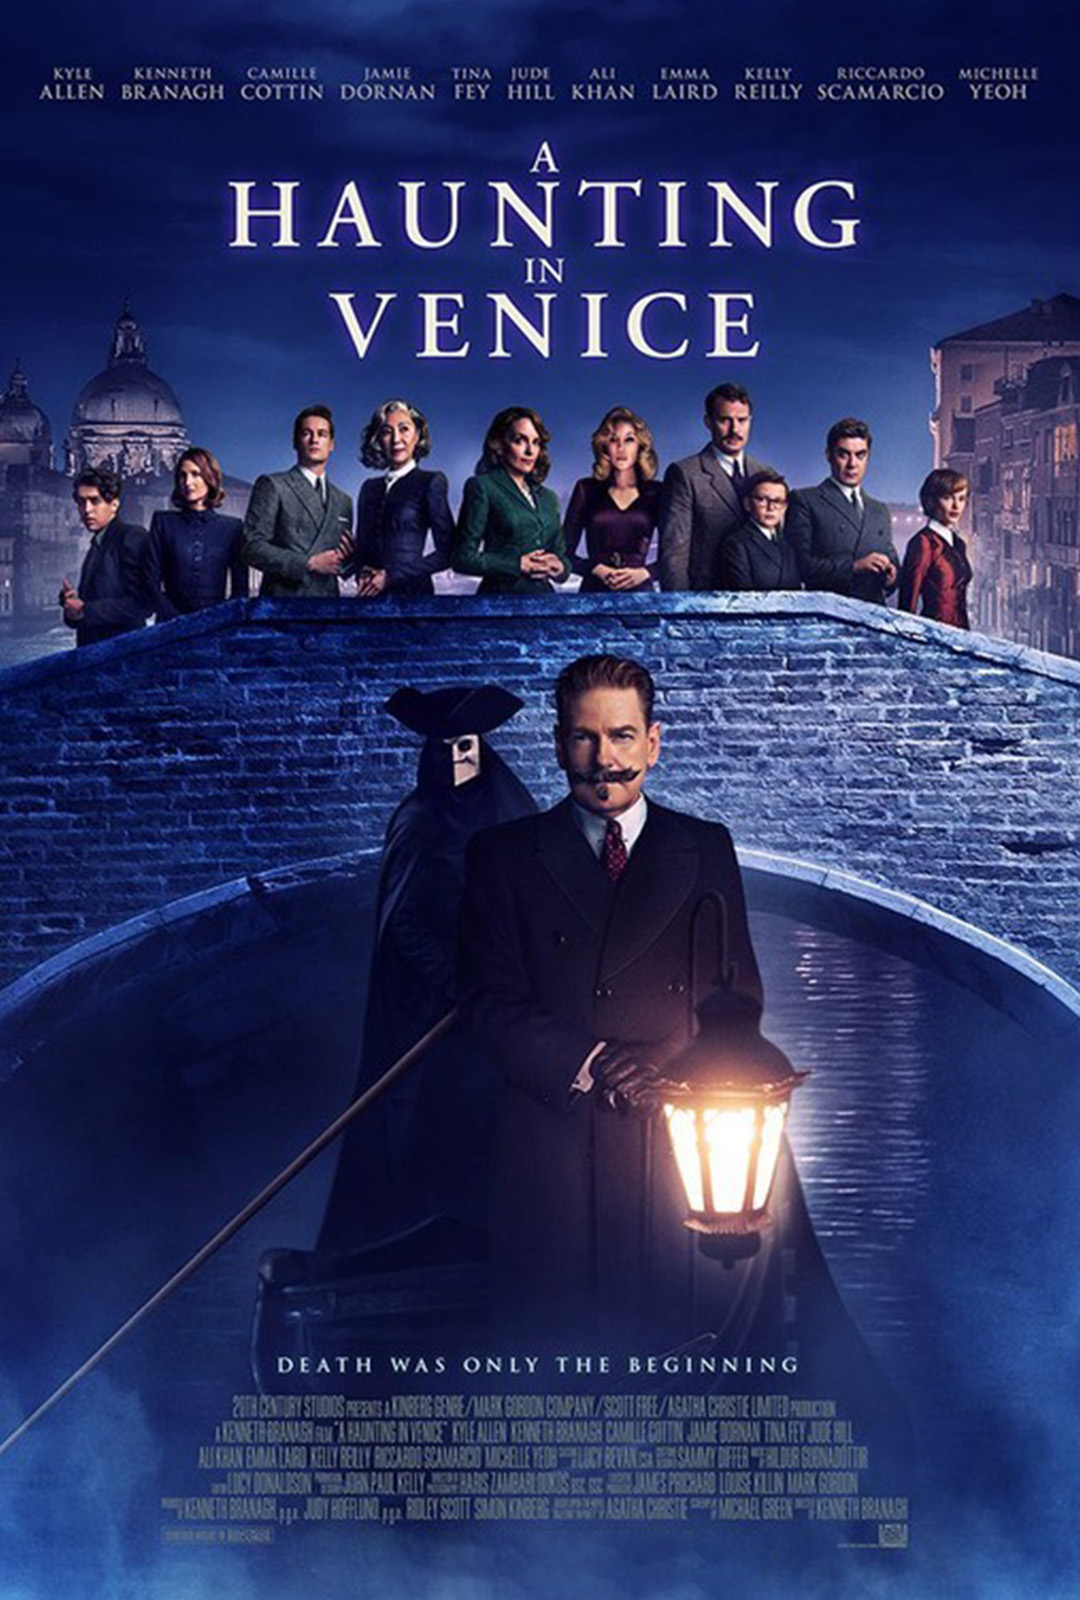 Movie Poster: A Haunting in Venice